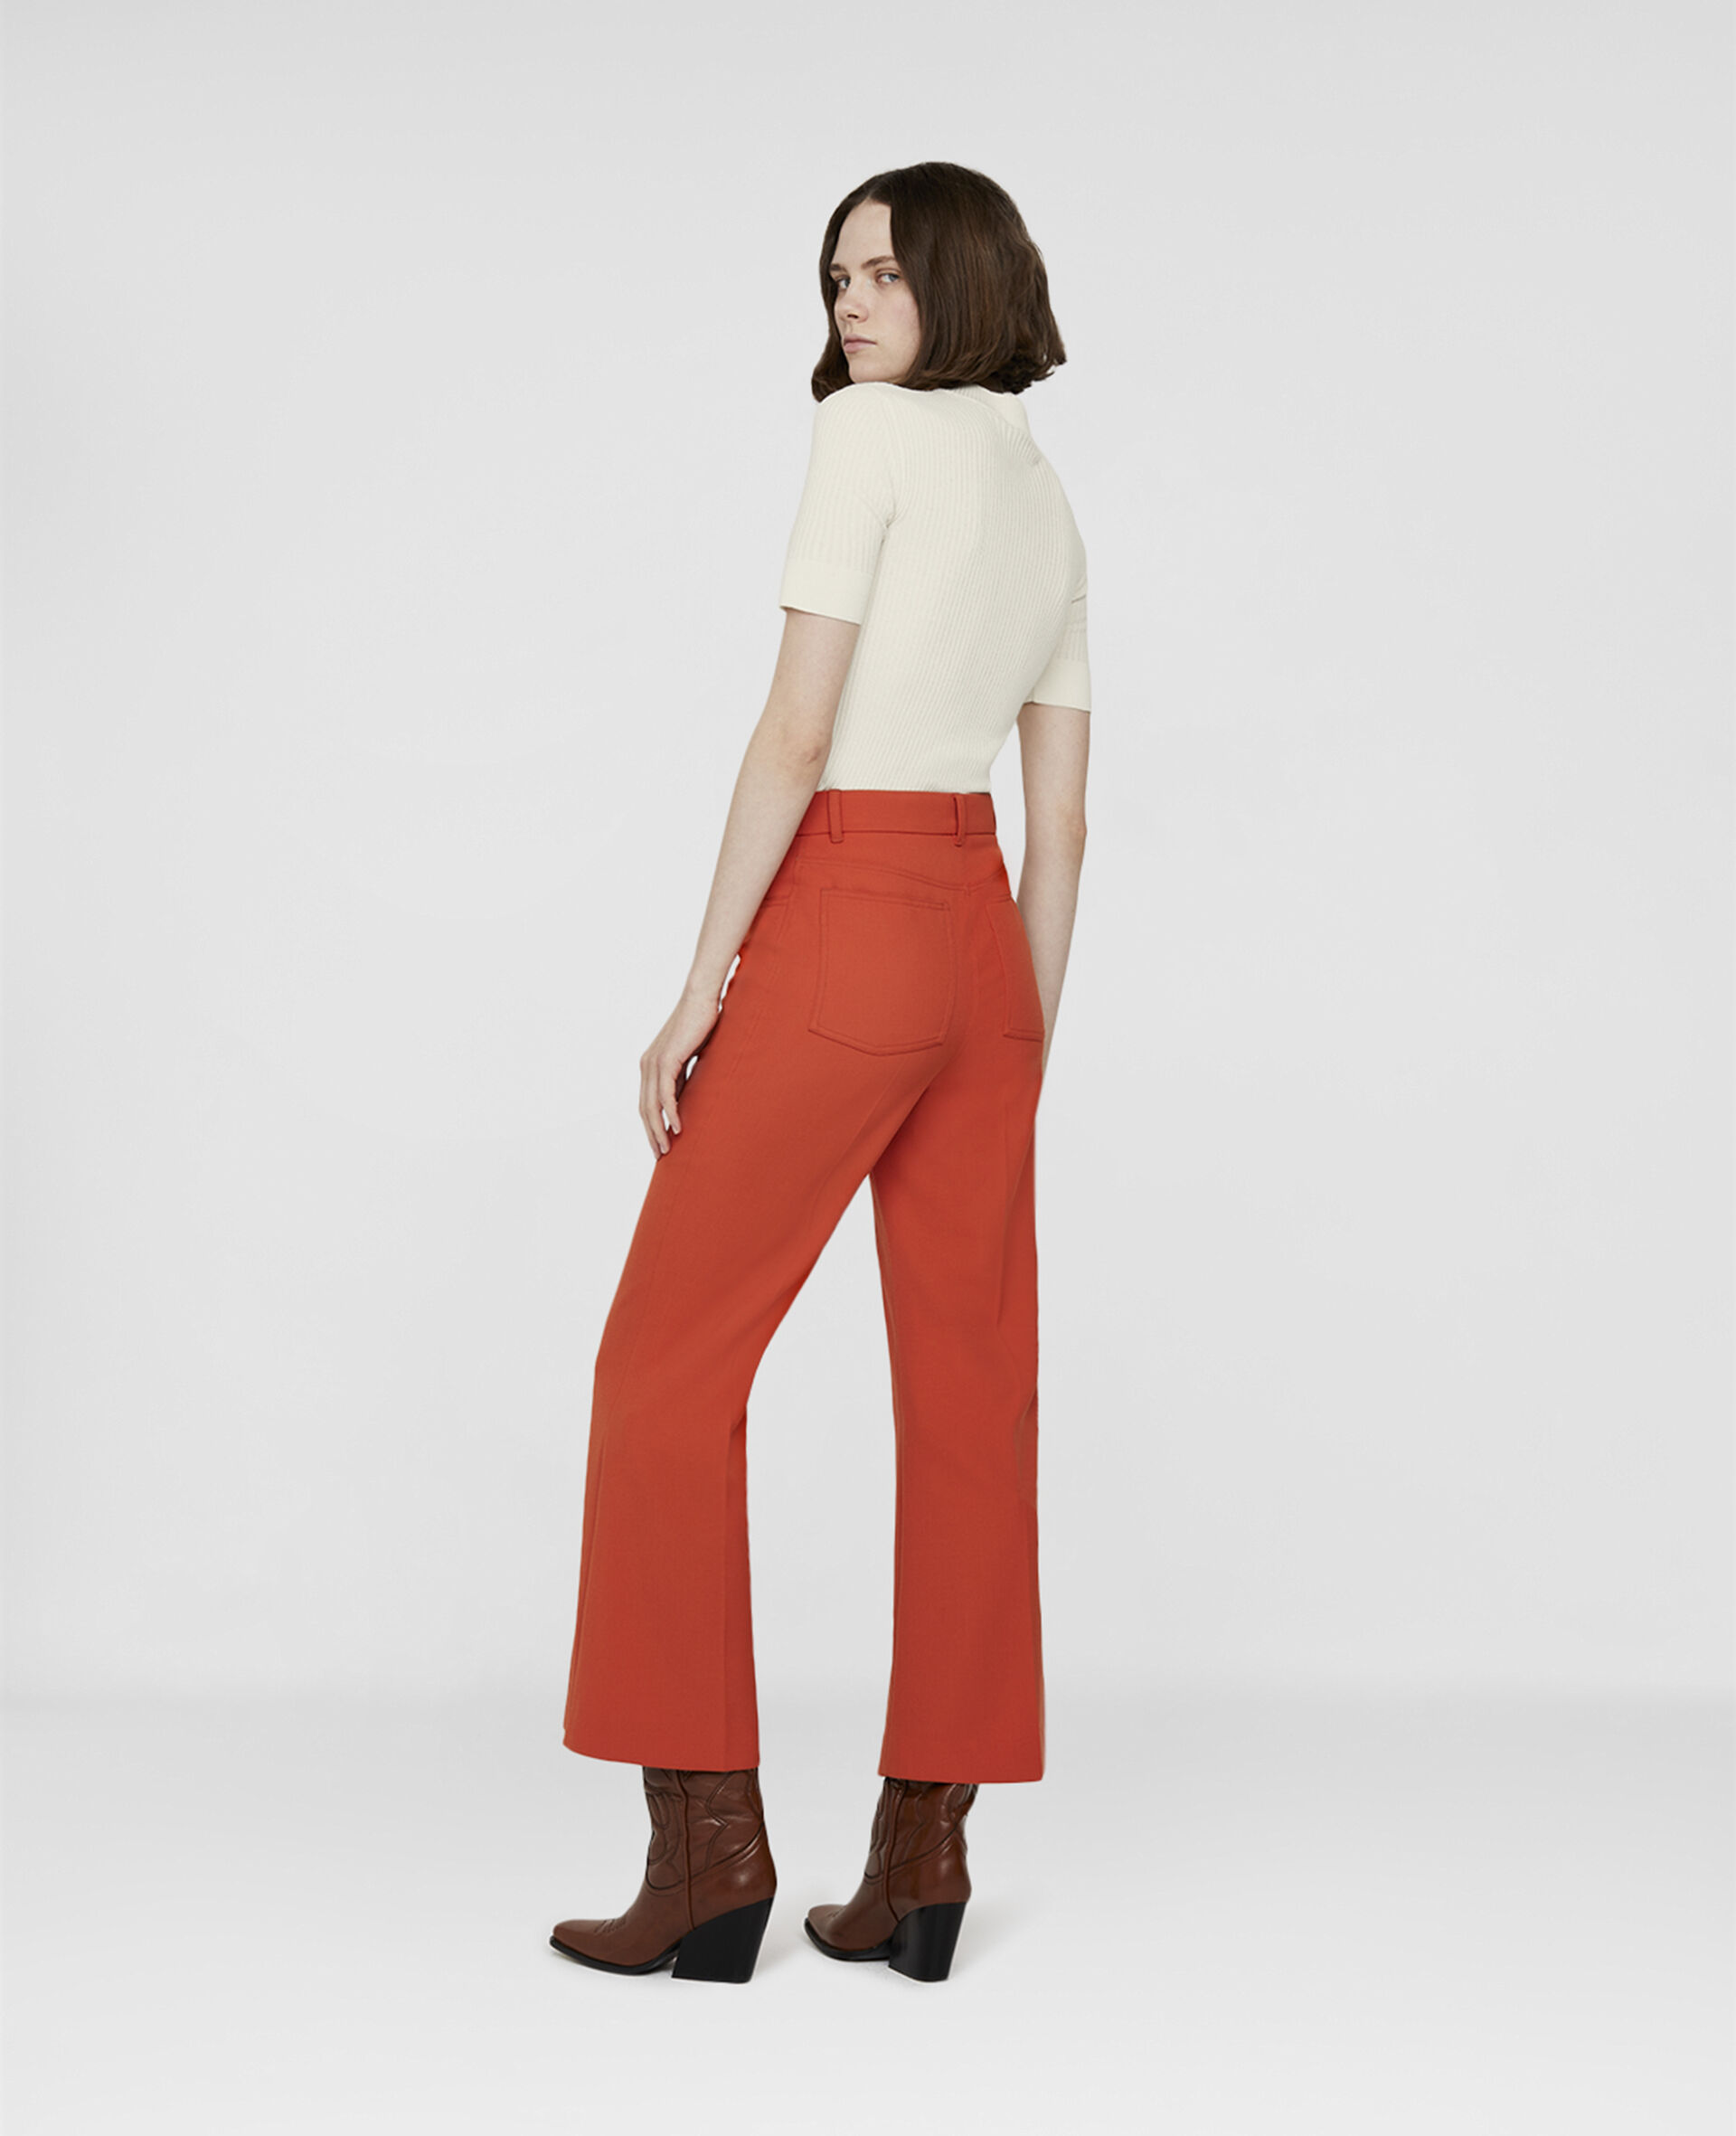 Tailored Twill Trousers-Orange-large image number 2